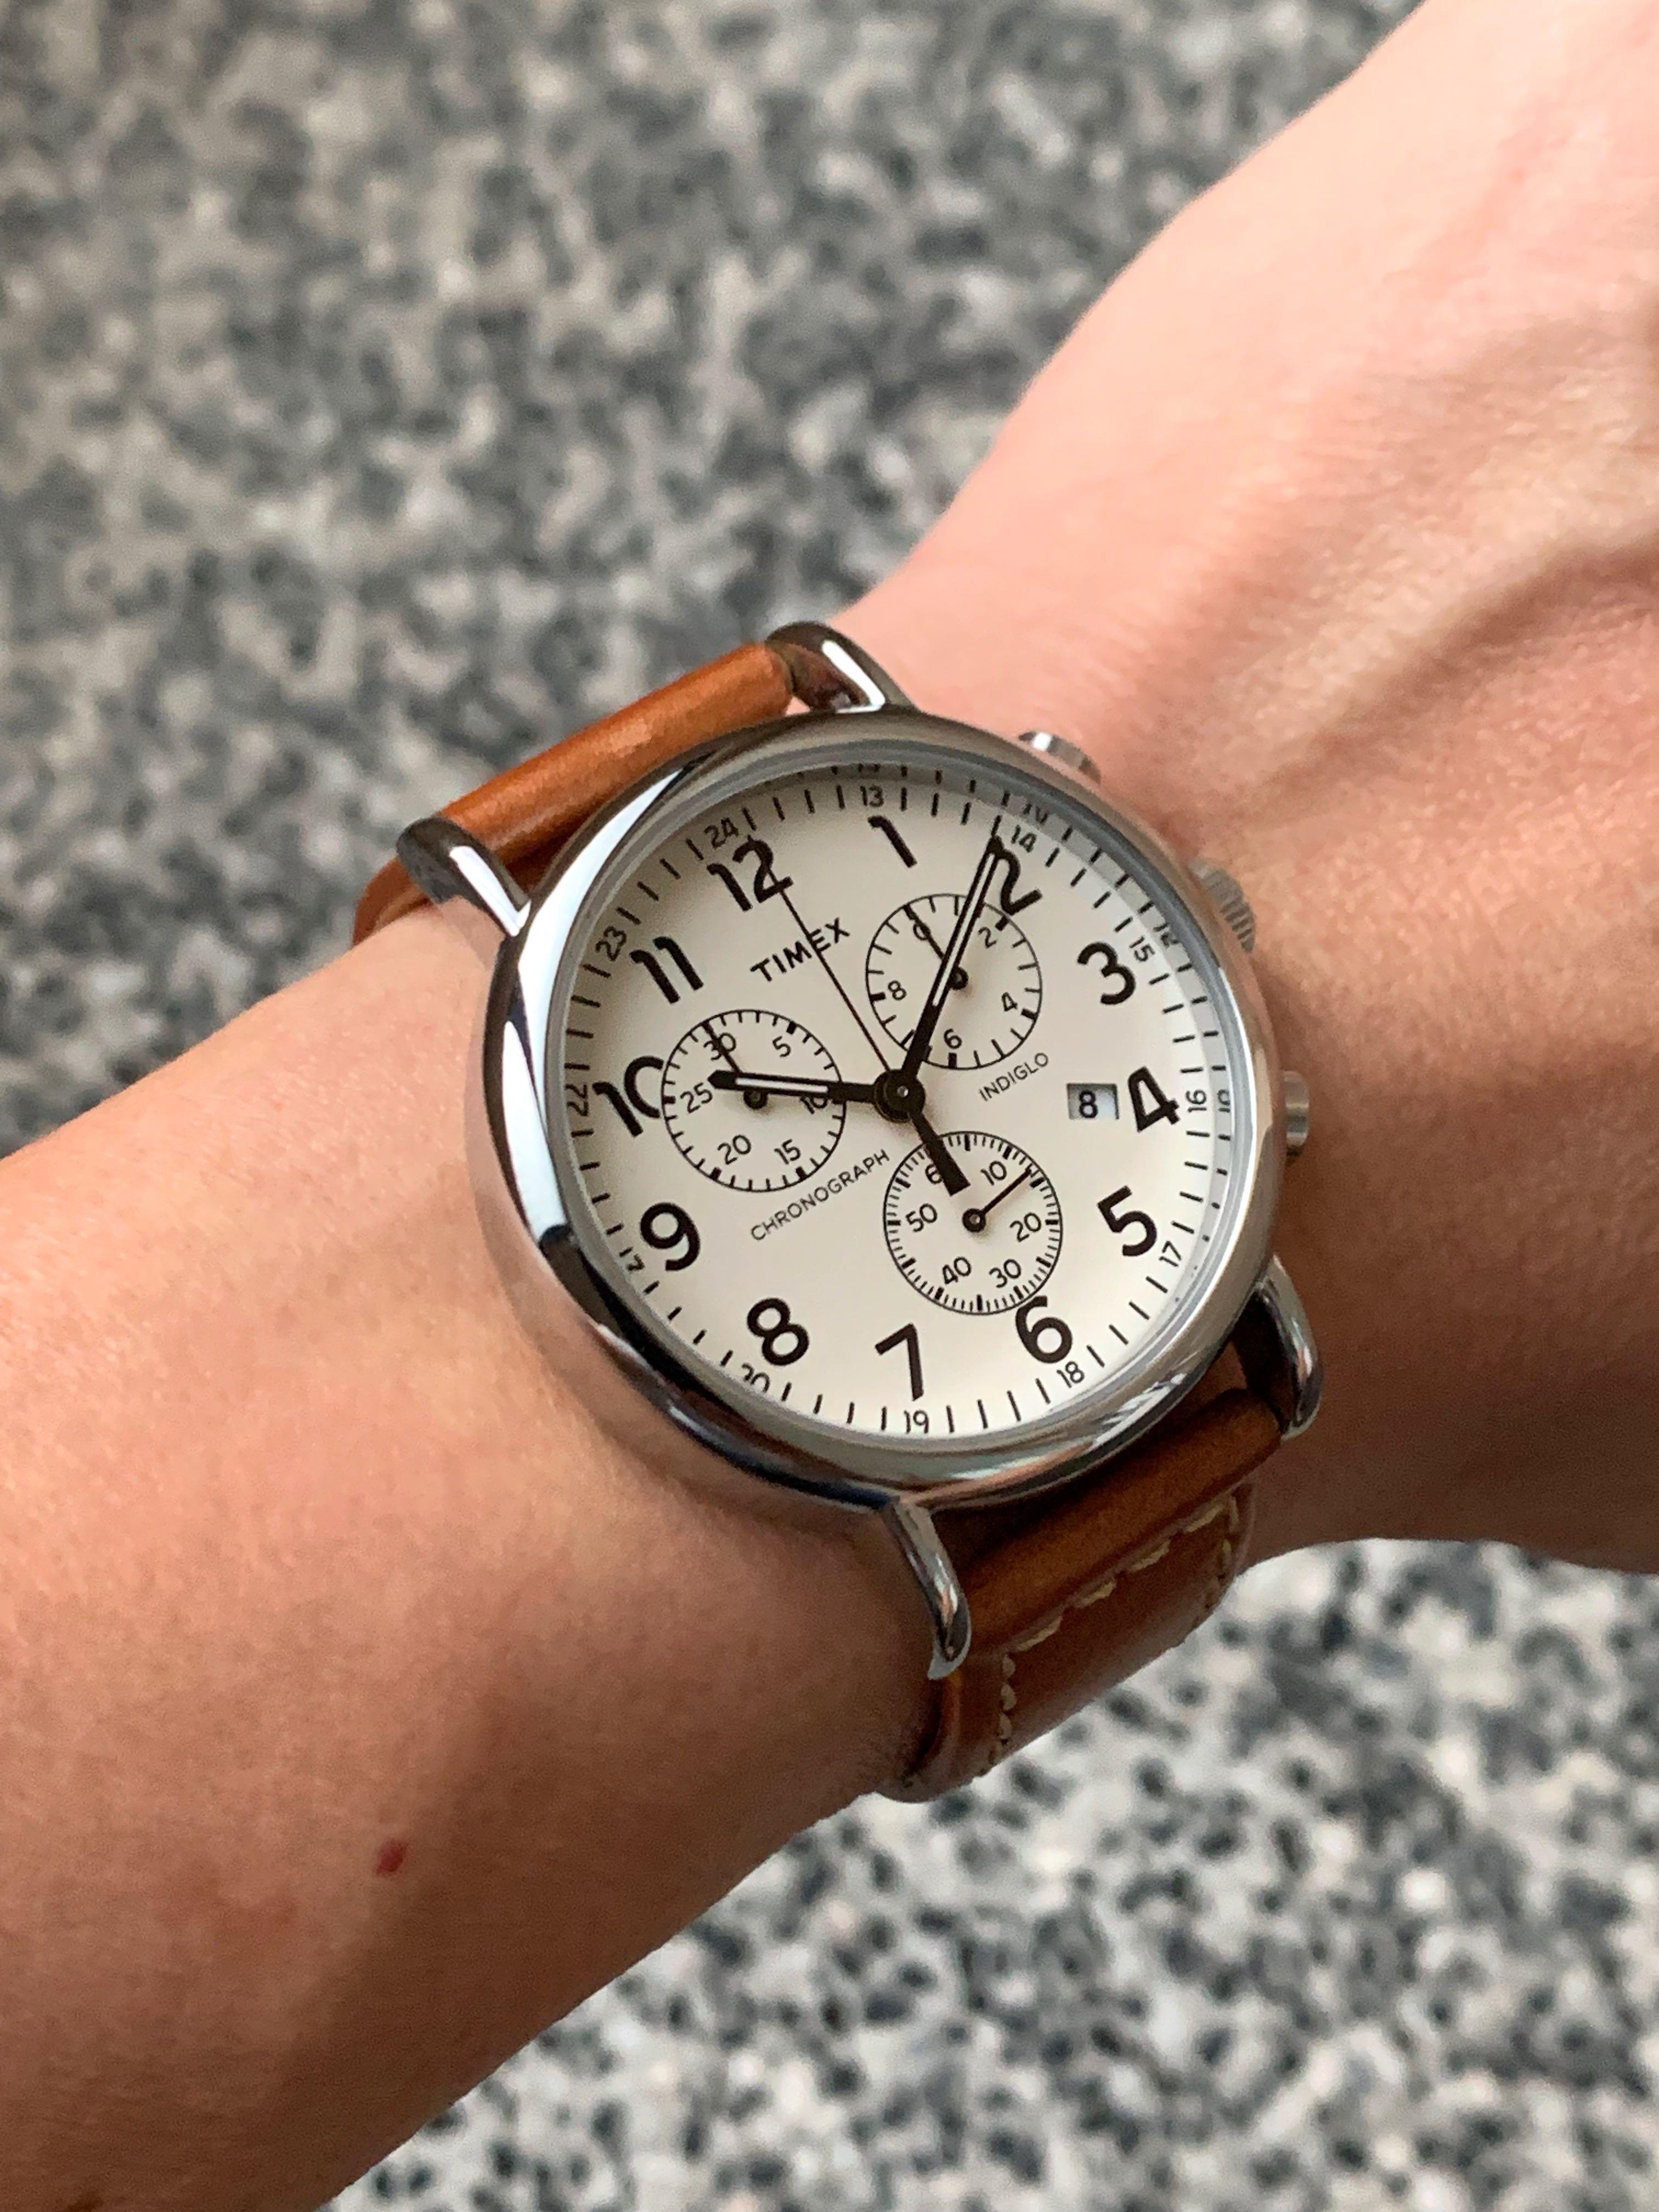 Timex Weekender Chronograph Indiglo Quartz Watch Leather Strap with Indiglo  backlight 9/10 Condition, Men's Fashion, Watches & Accessories, Watches on  Carousell